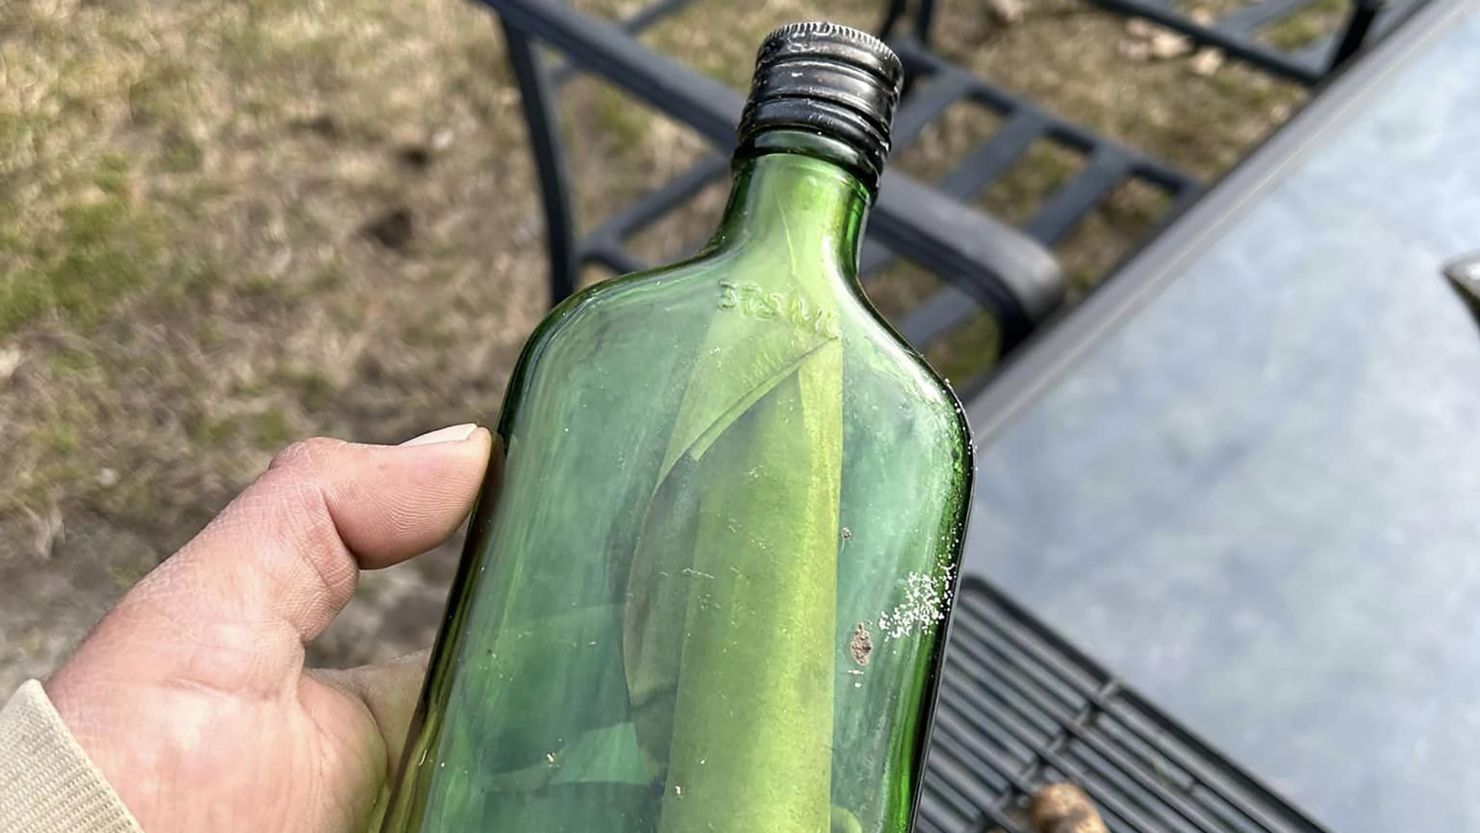 Local waterfowl guide Adam Travis came across a decades-old message in a bottle in Shinnecock Bay, New York.